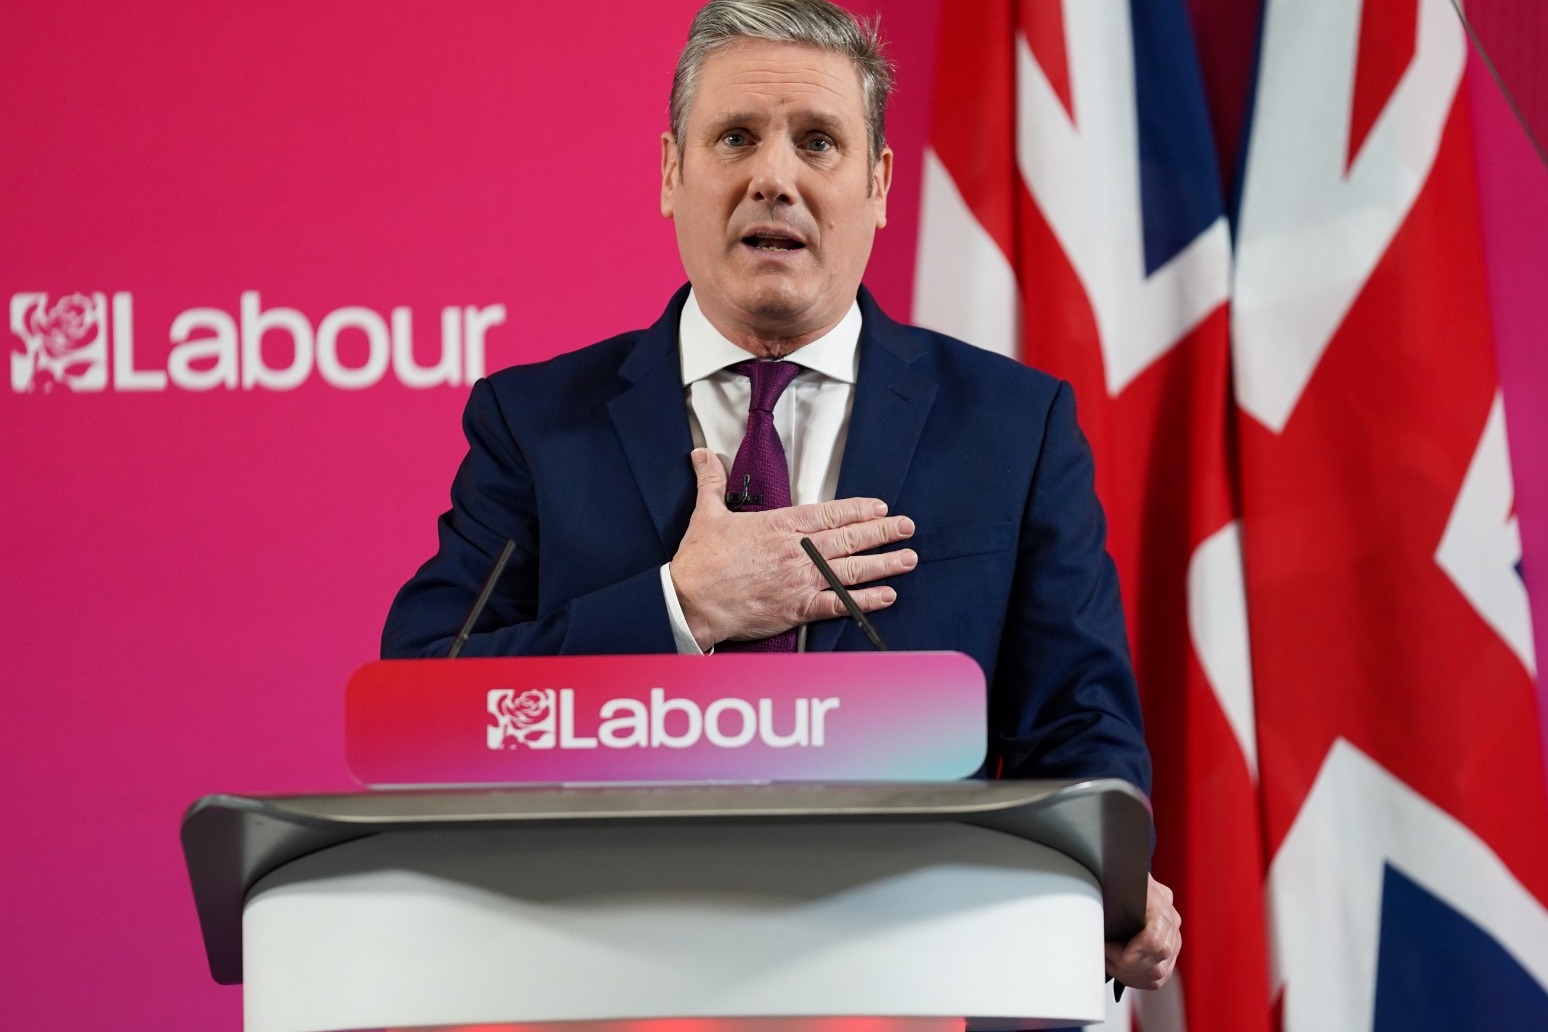 Keir Starmer sets out his ‘contract’ with the British people 